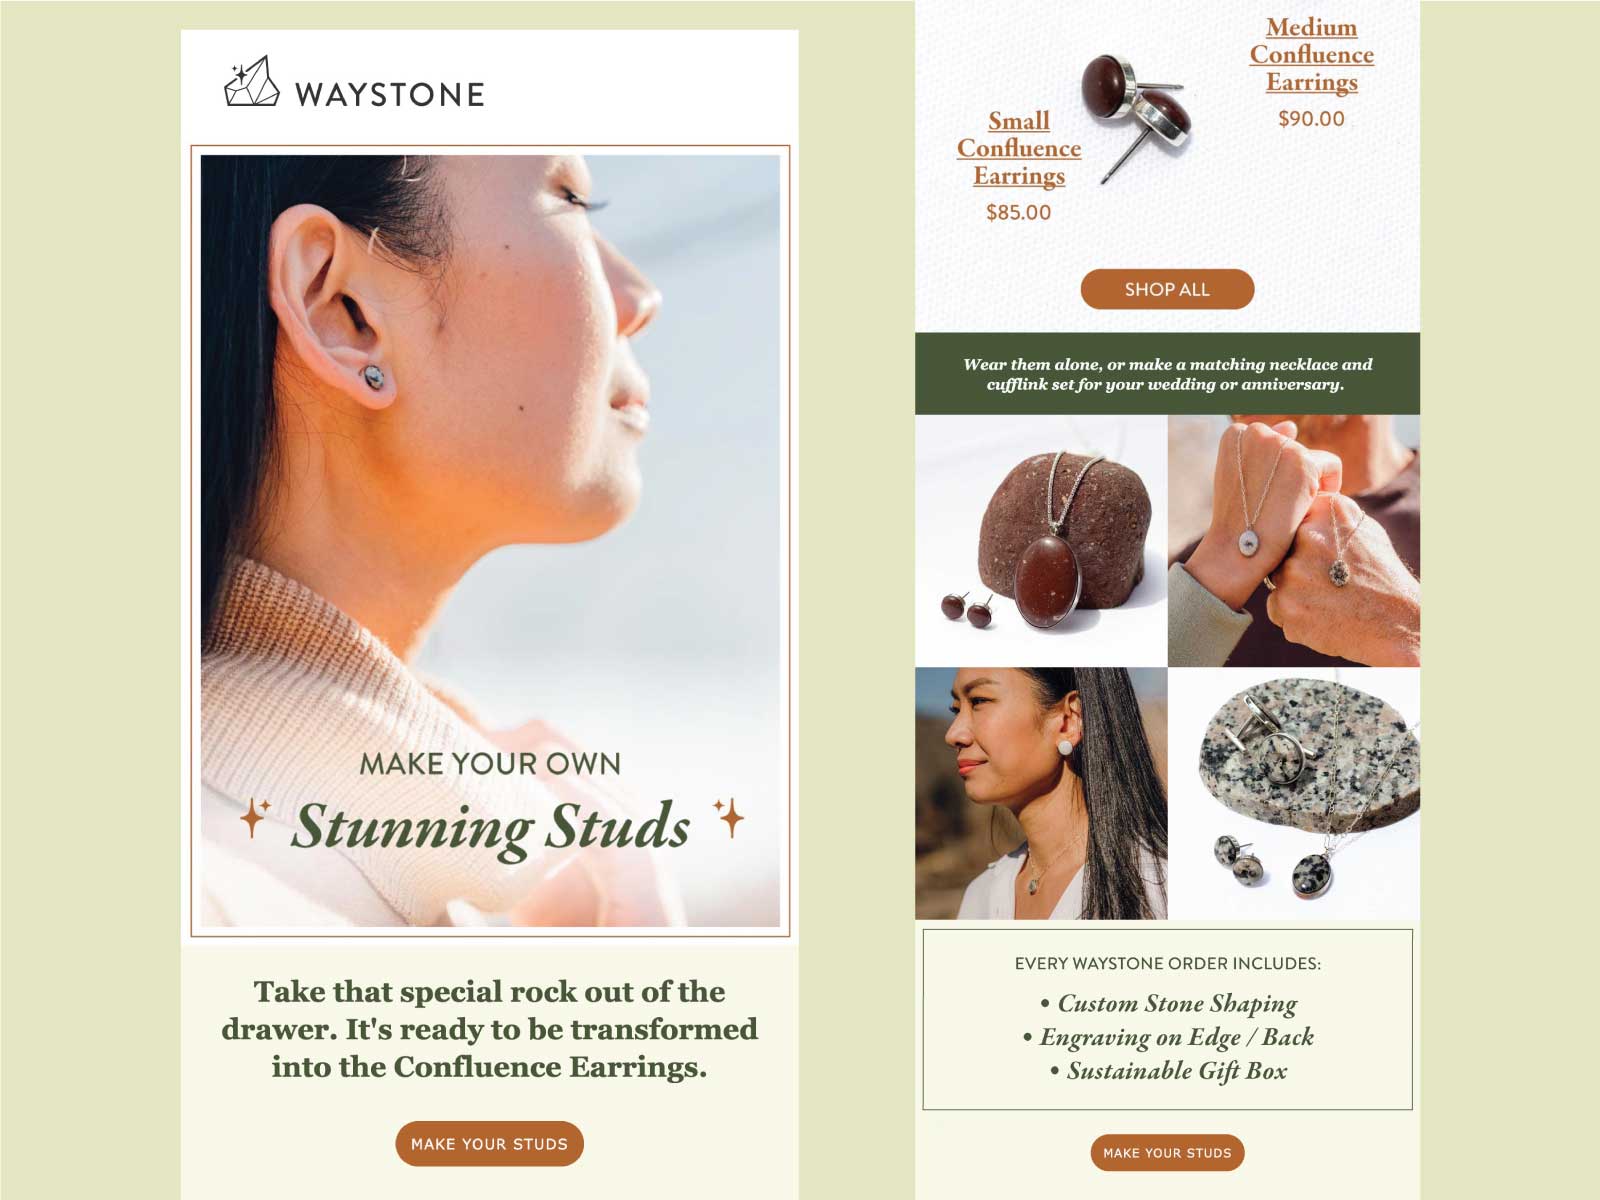 An e-commerce email design for Waystone created in Klaviyo